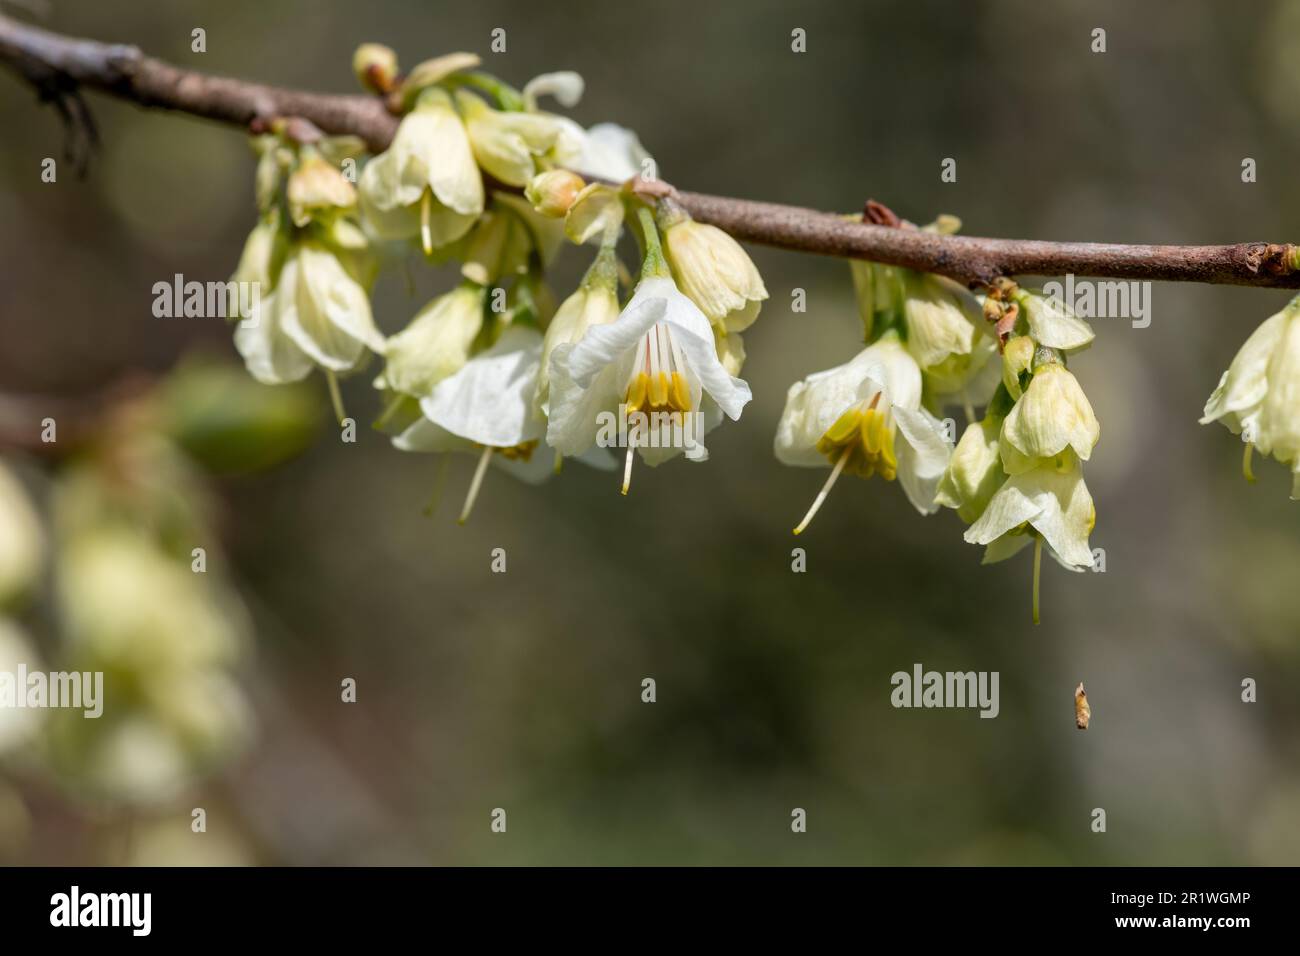 Close up of flowers on a mountain snowdrop (halesia monticola) tree Stock Photo